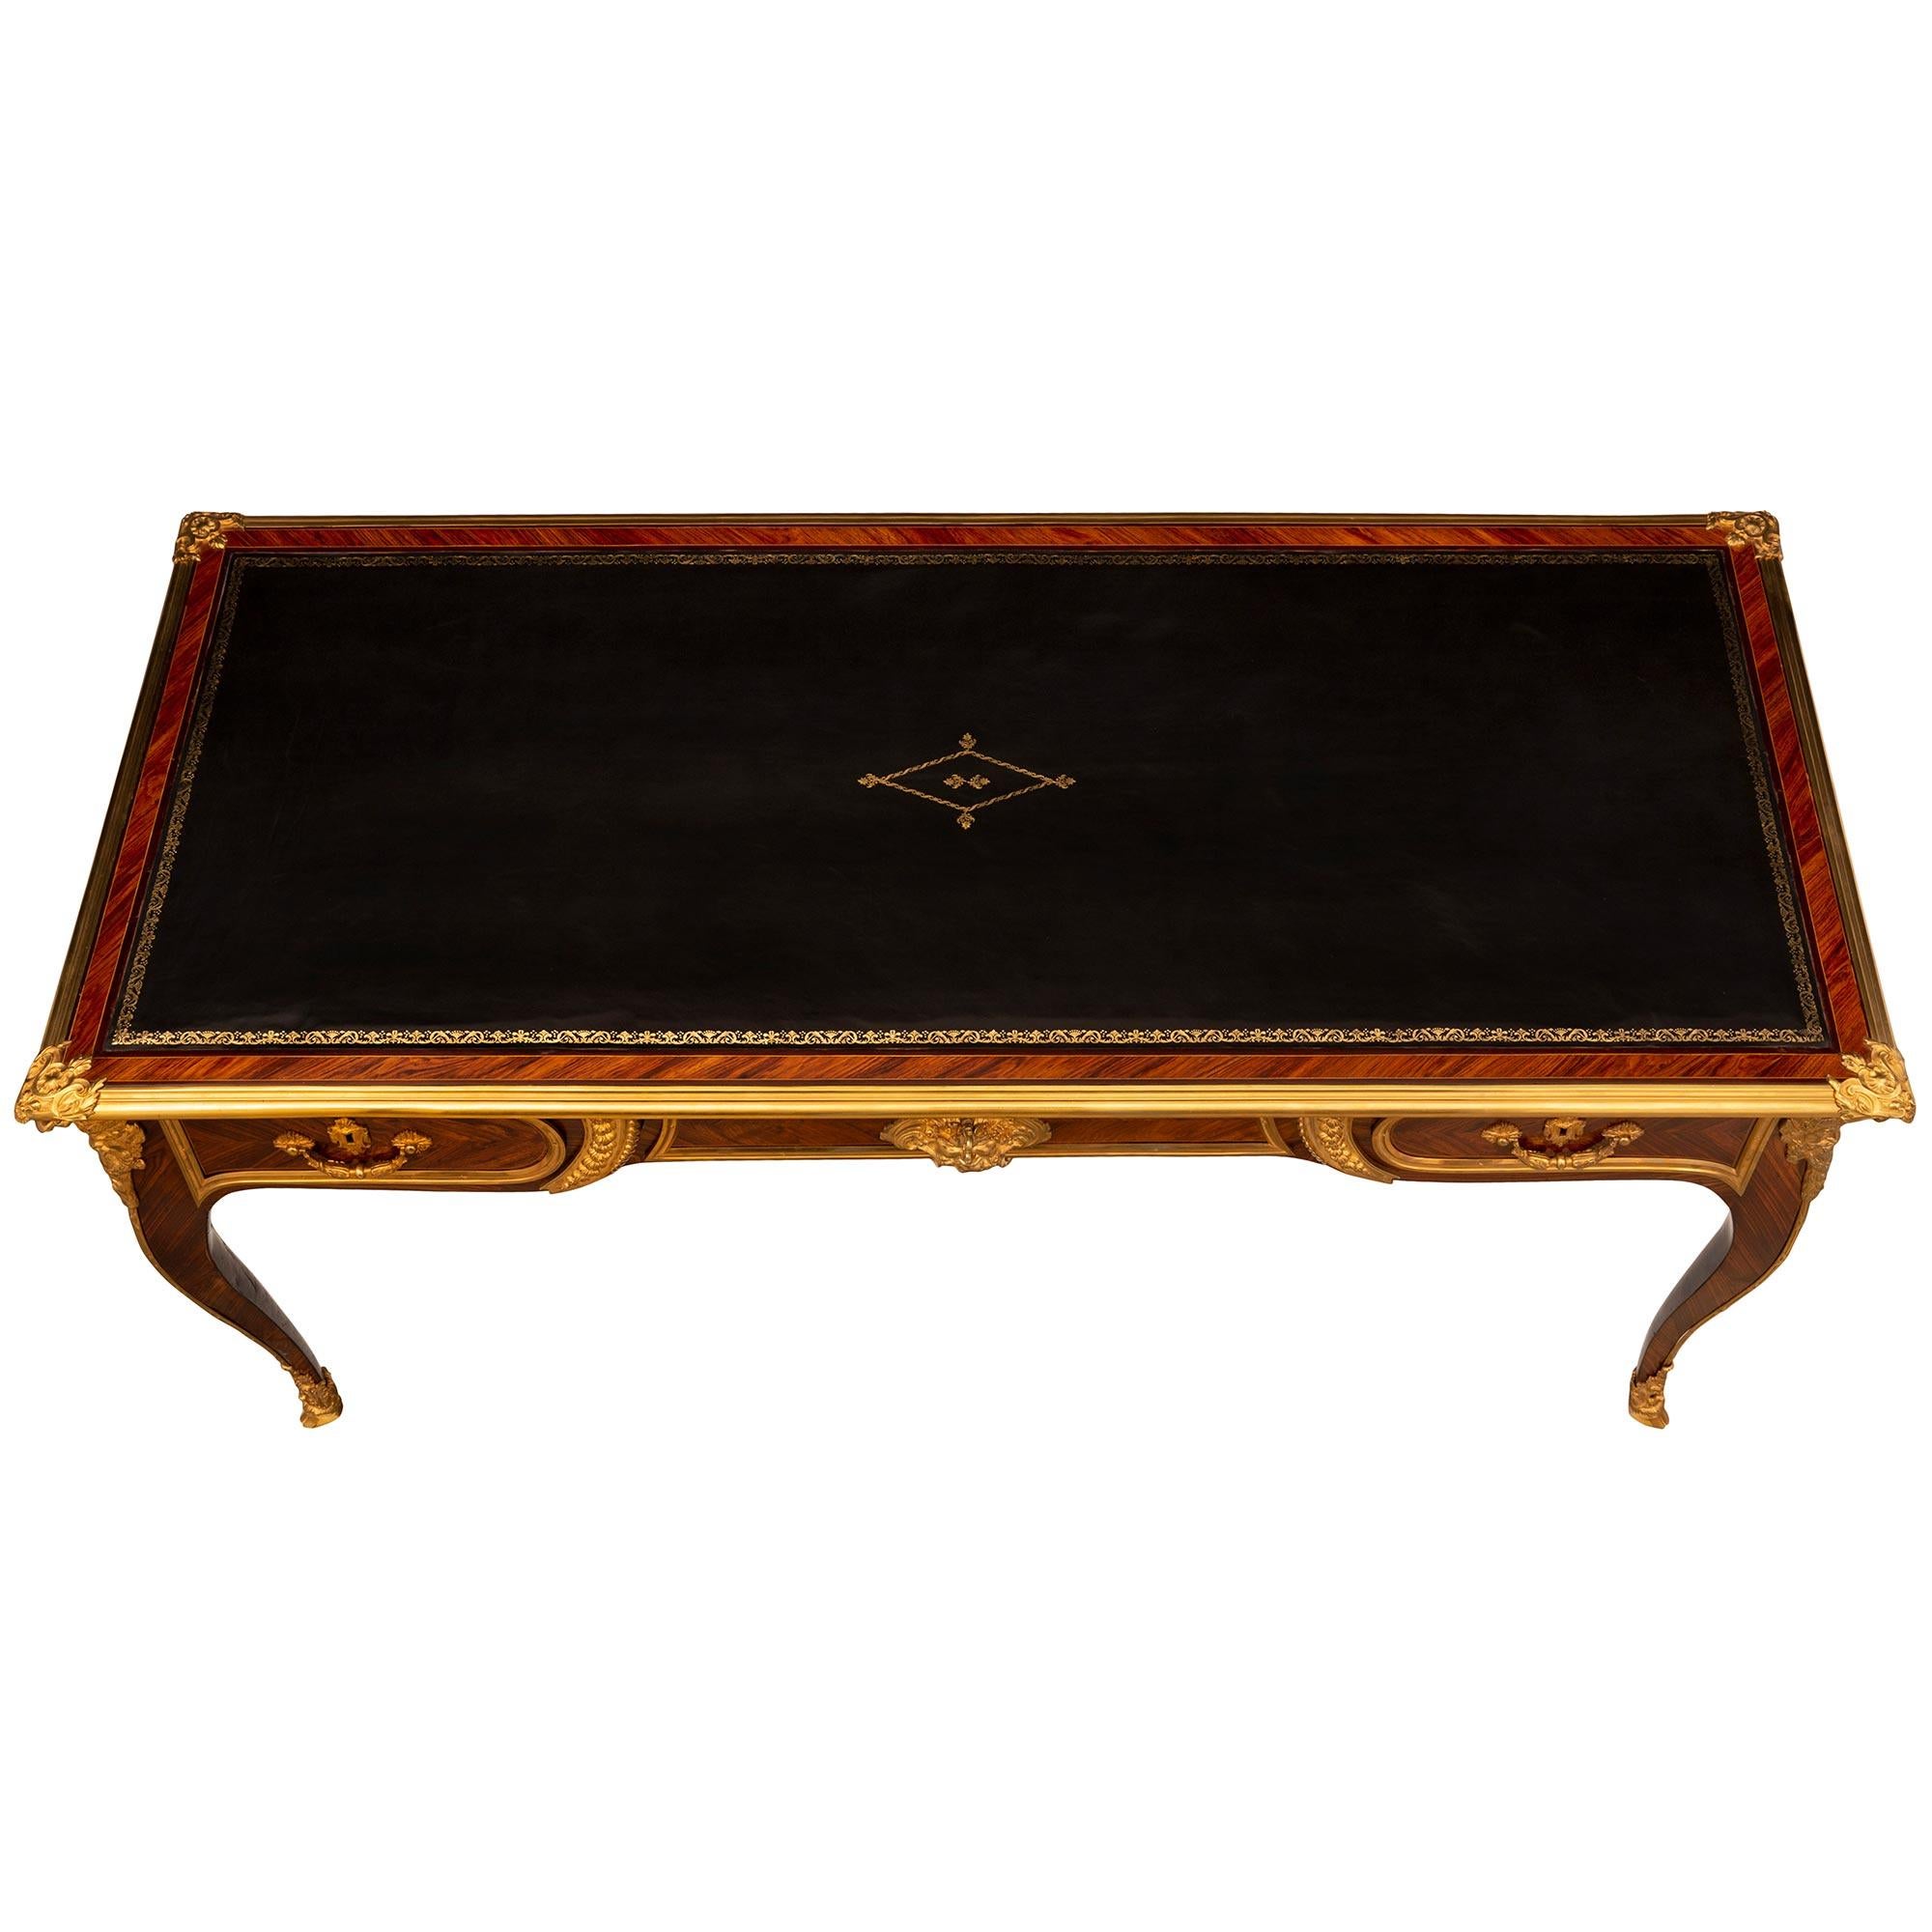 A magnificent and very high quality French 18th century Louis XV period Tulipwood, Kingwood, and ormolu Bureau Plat desk. The desk is raised by elegant cabriole leg with exquisite pierced fitted ormolu sabots with fine foliate designs and hoof feet